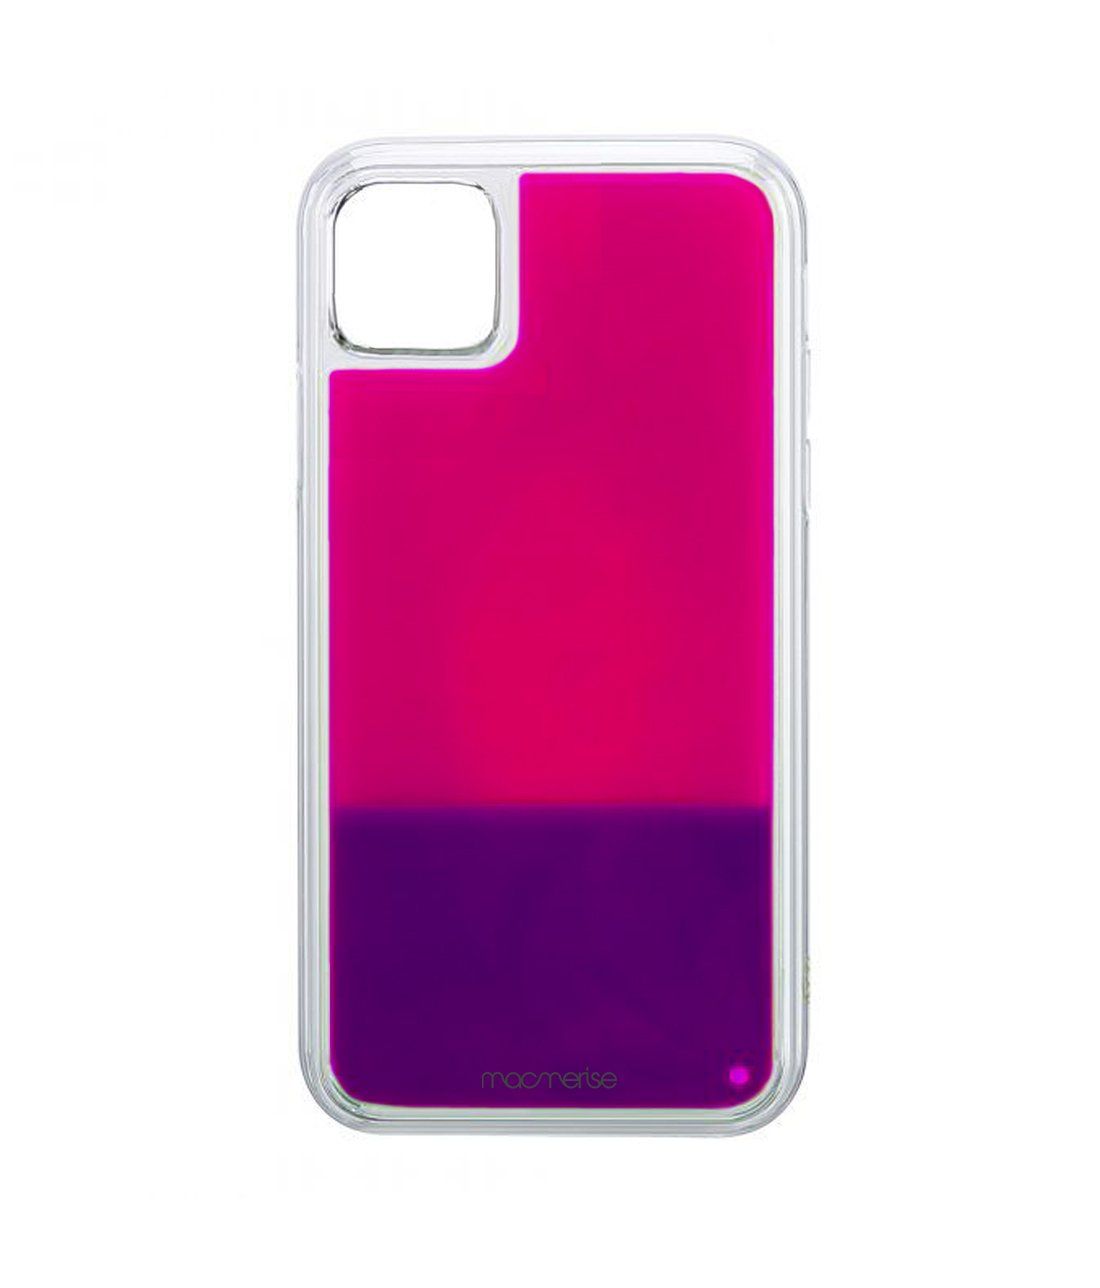 Neon Sand Purple Pink - Neon Sand Phone Case for iPhone 11 Pro